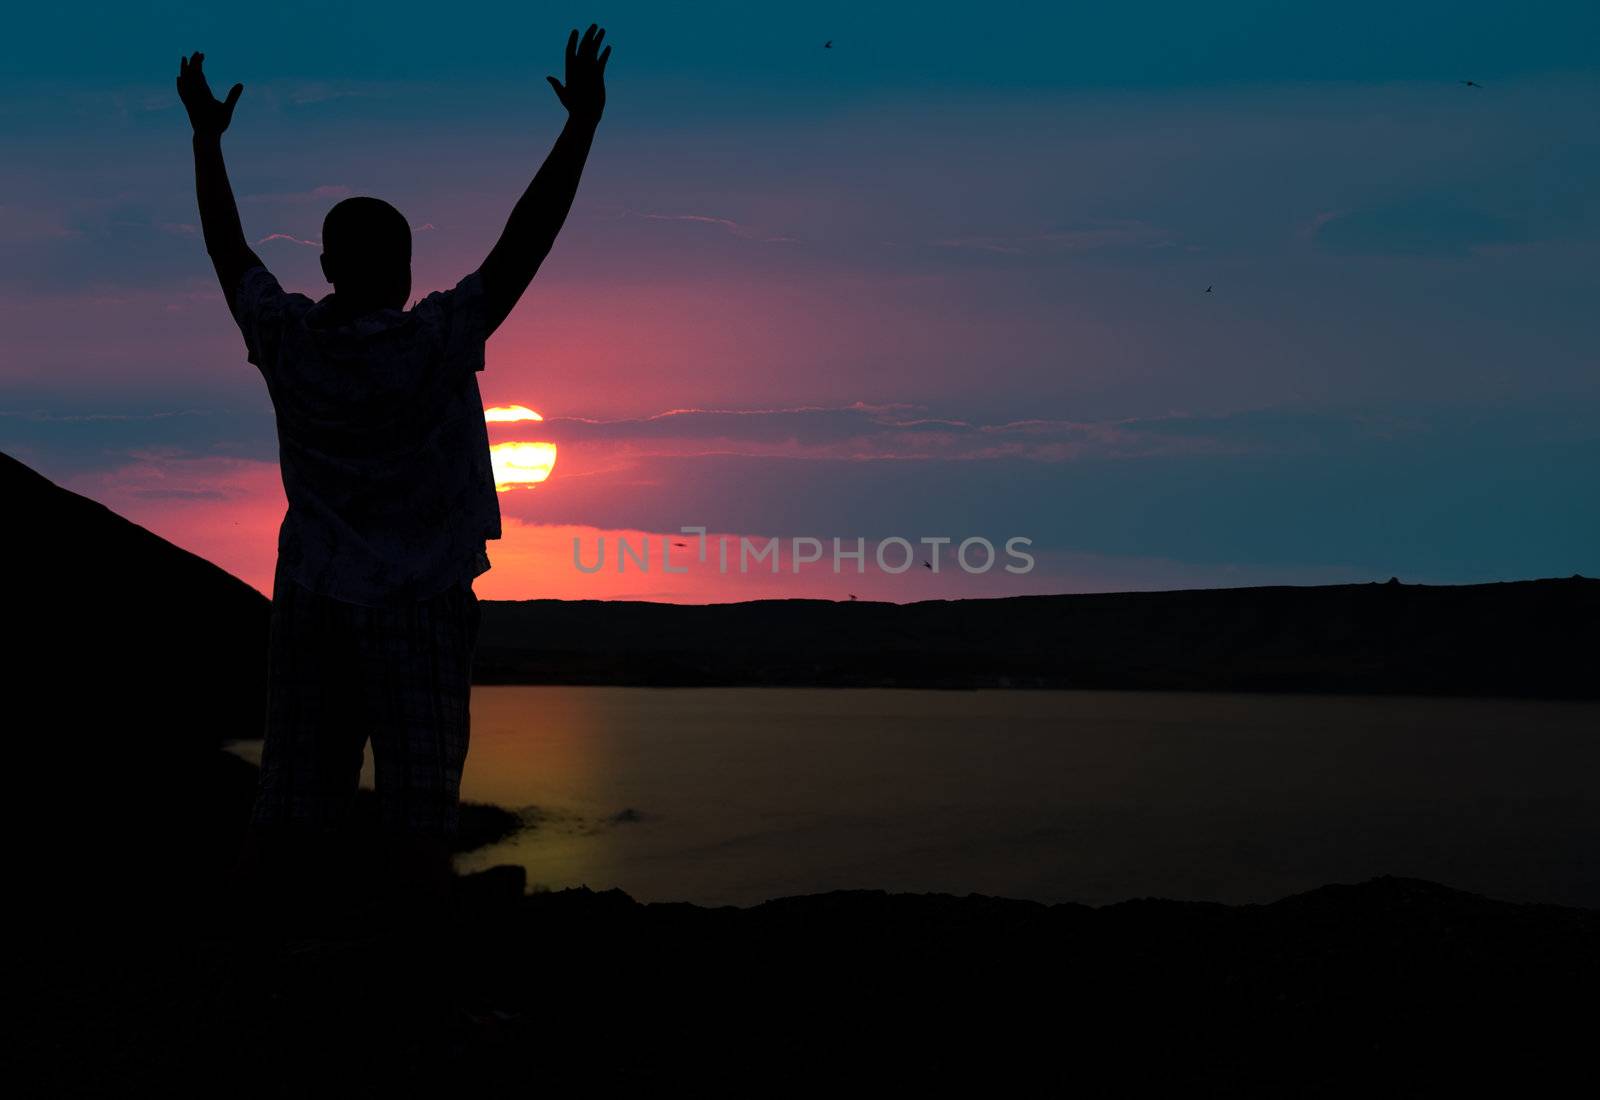 The man welcomes the sunset sun. Upwards the lifted hands